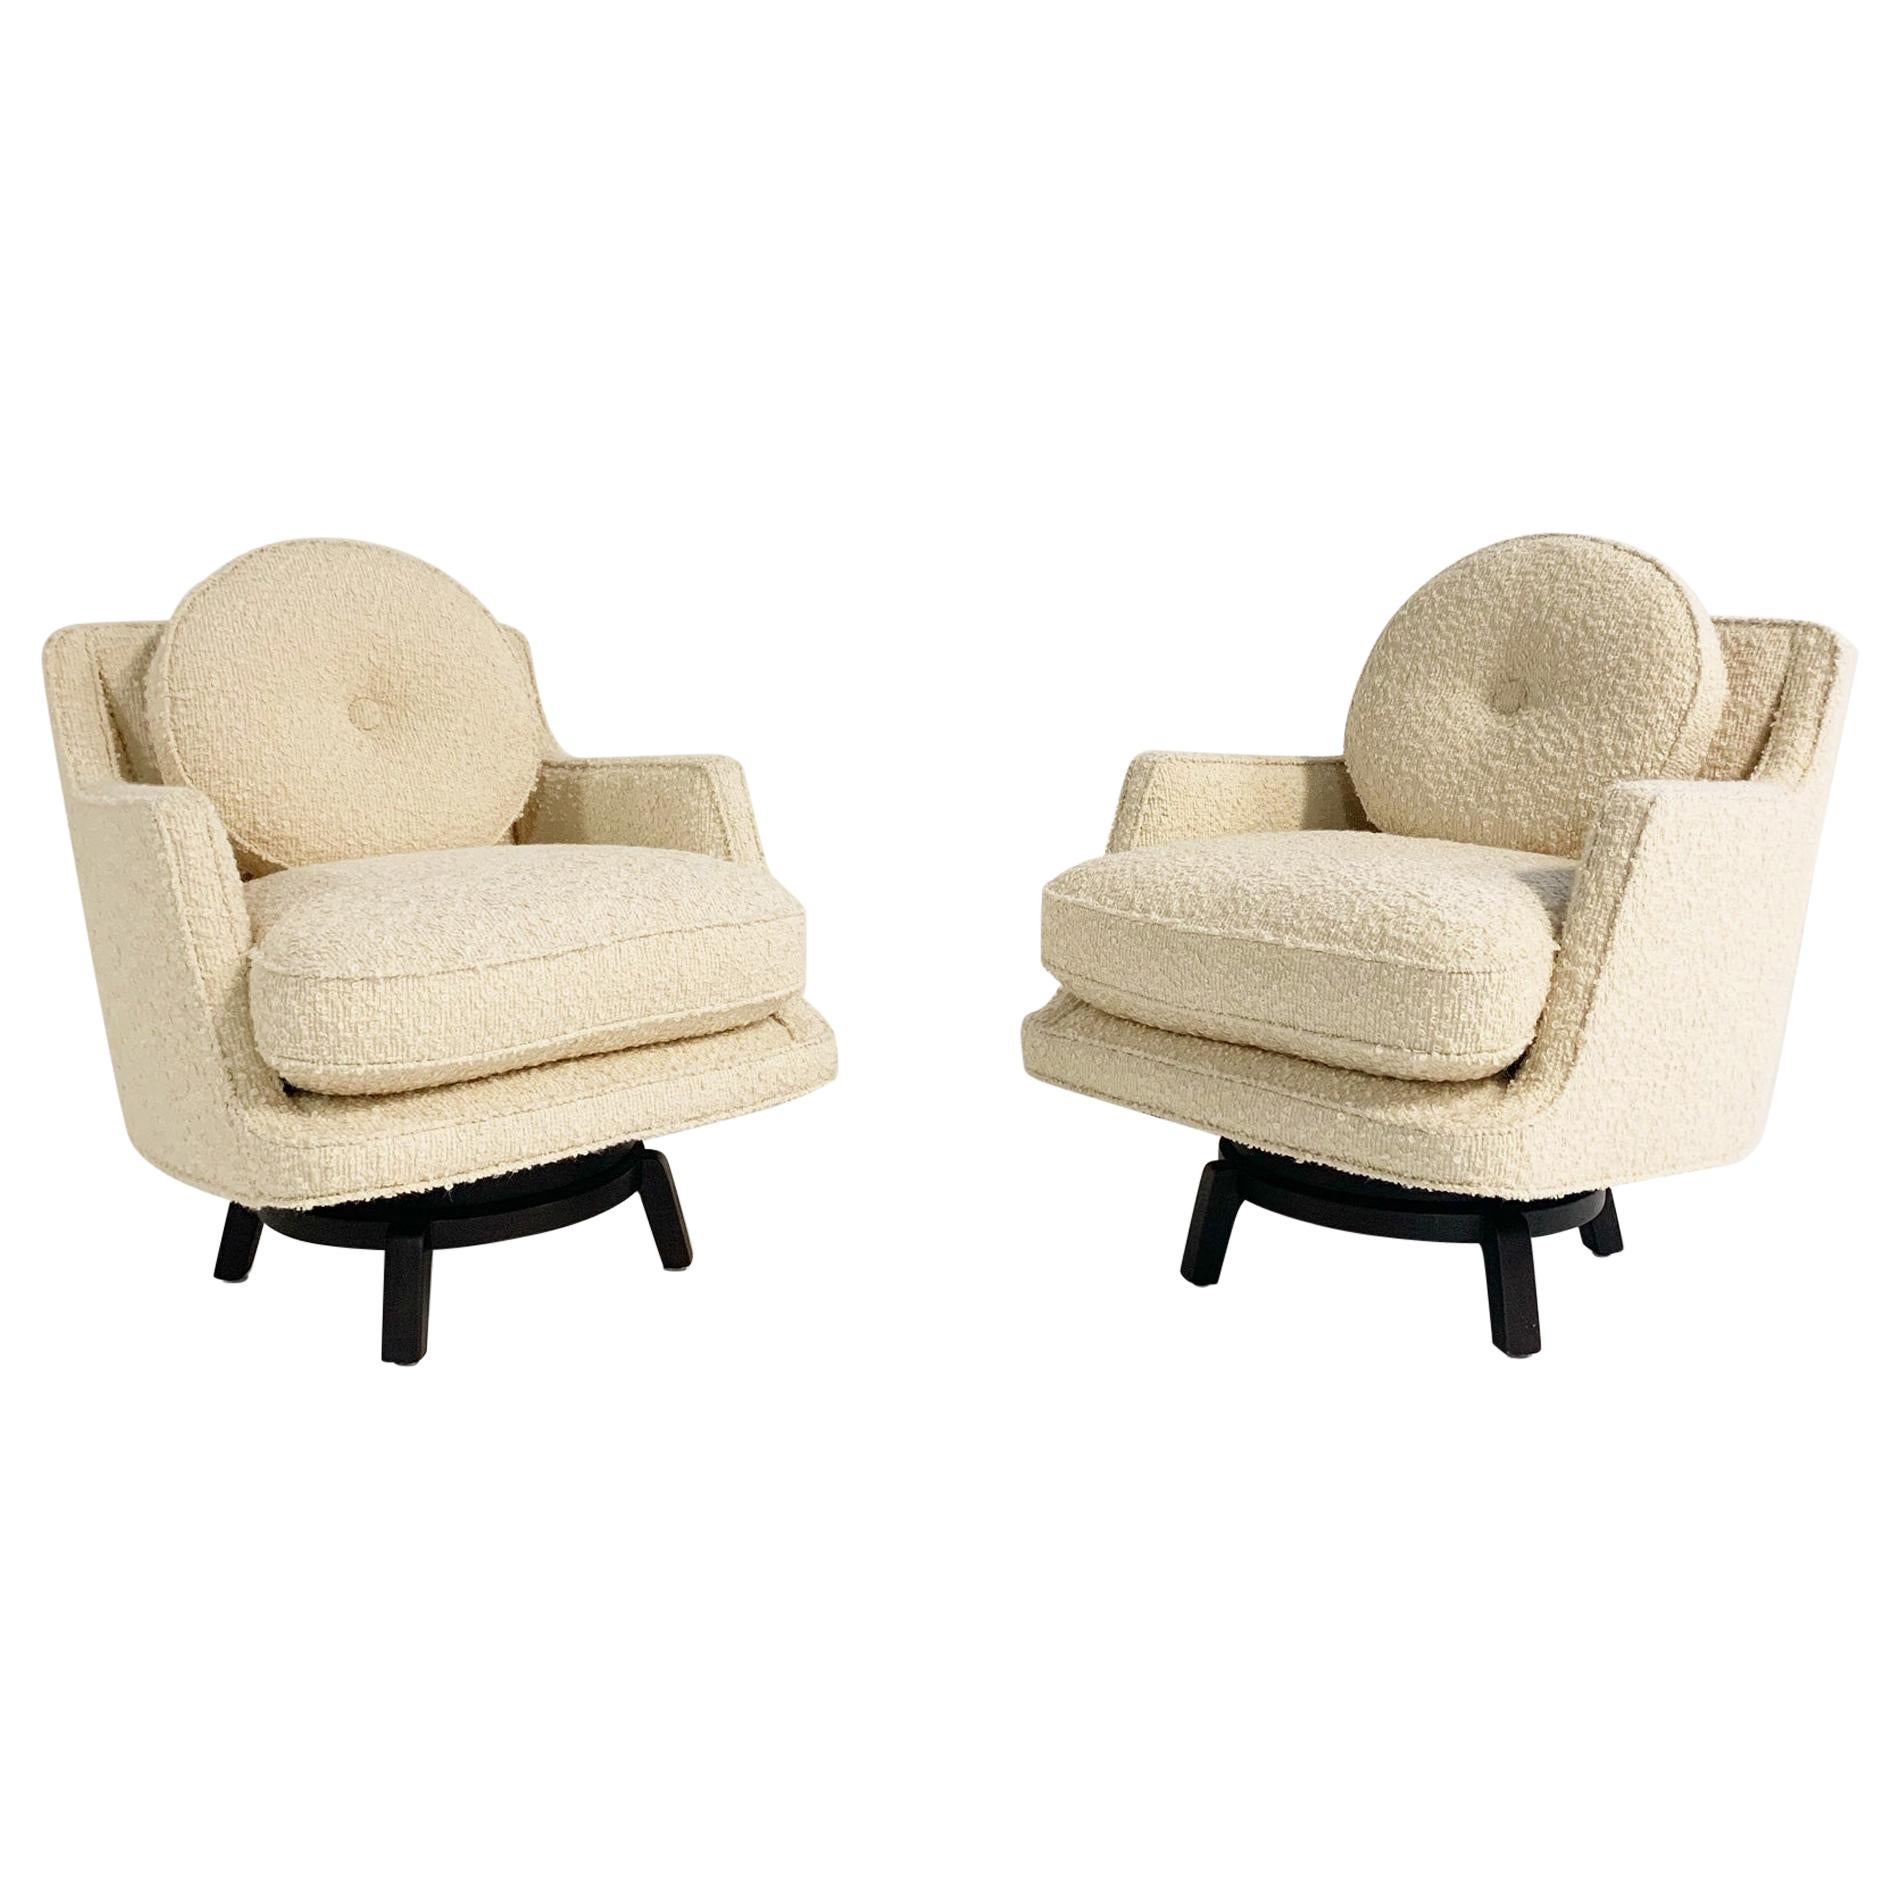 Edward Wormley Model 5609 Swivel Lounge Chairs in Schumacher Boucle, Pair